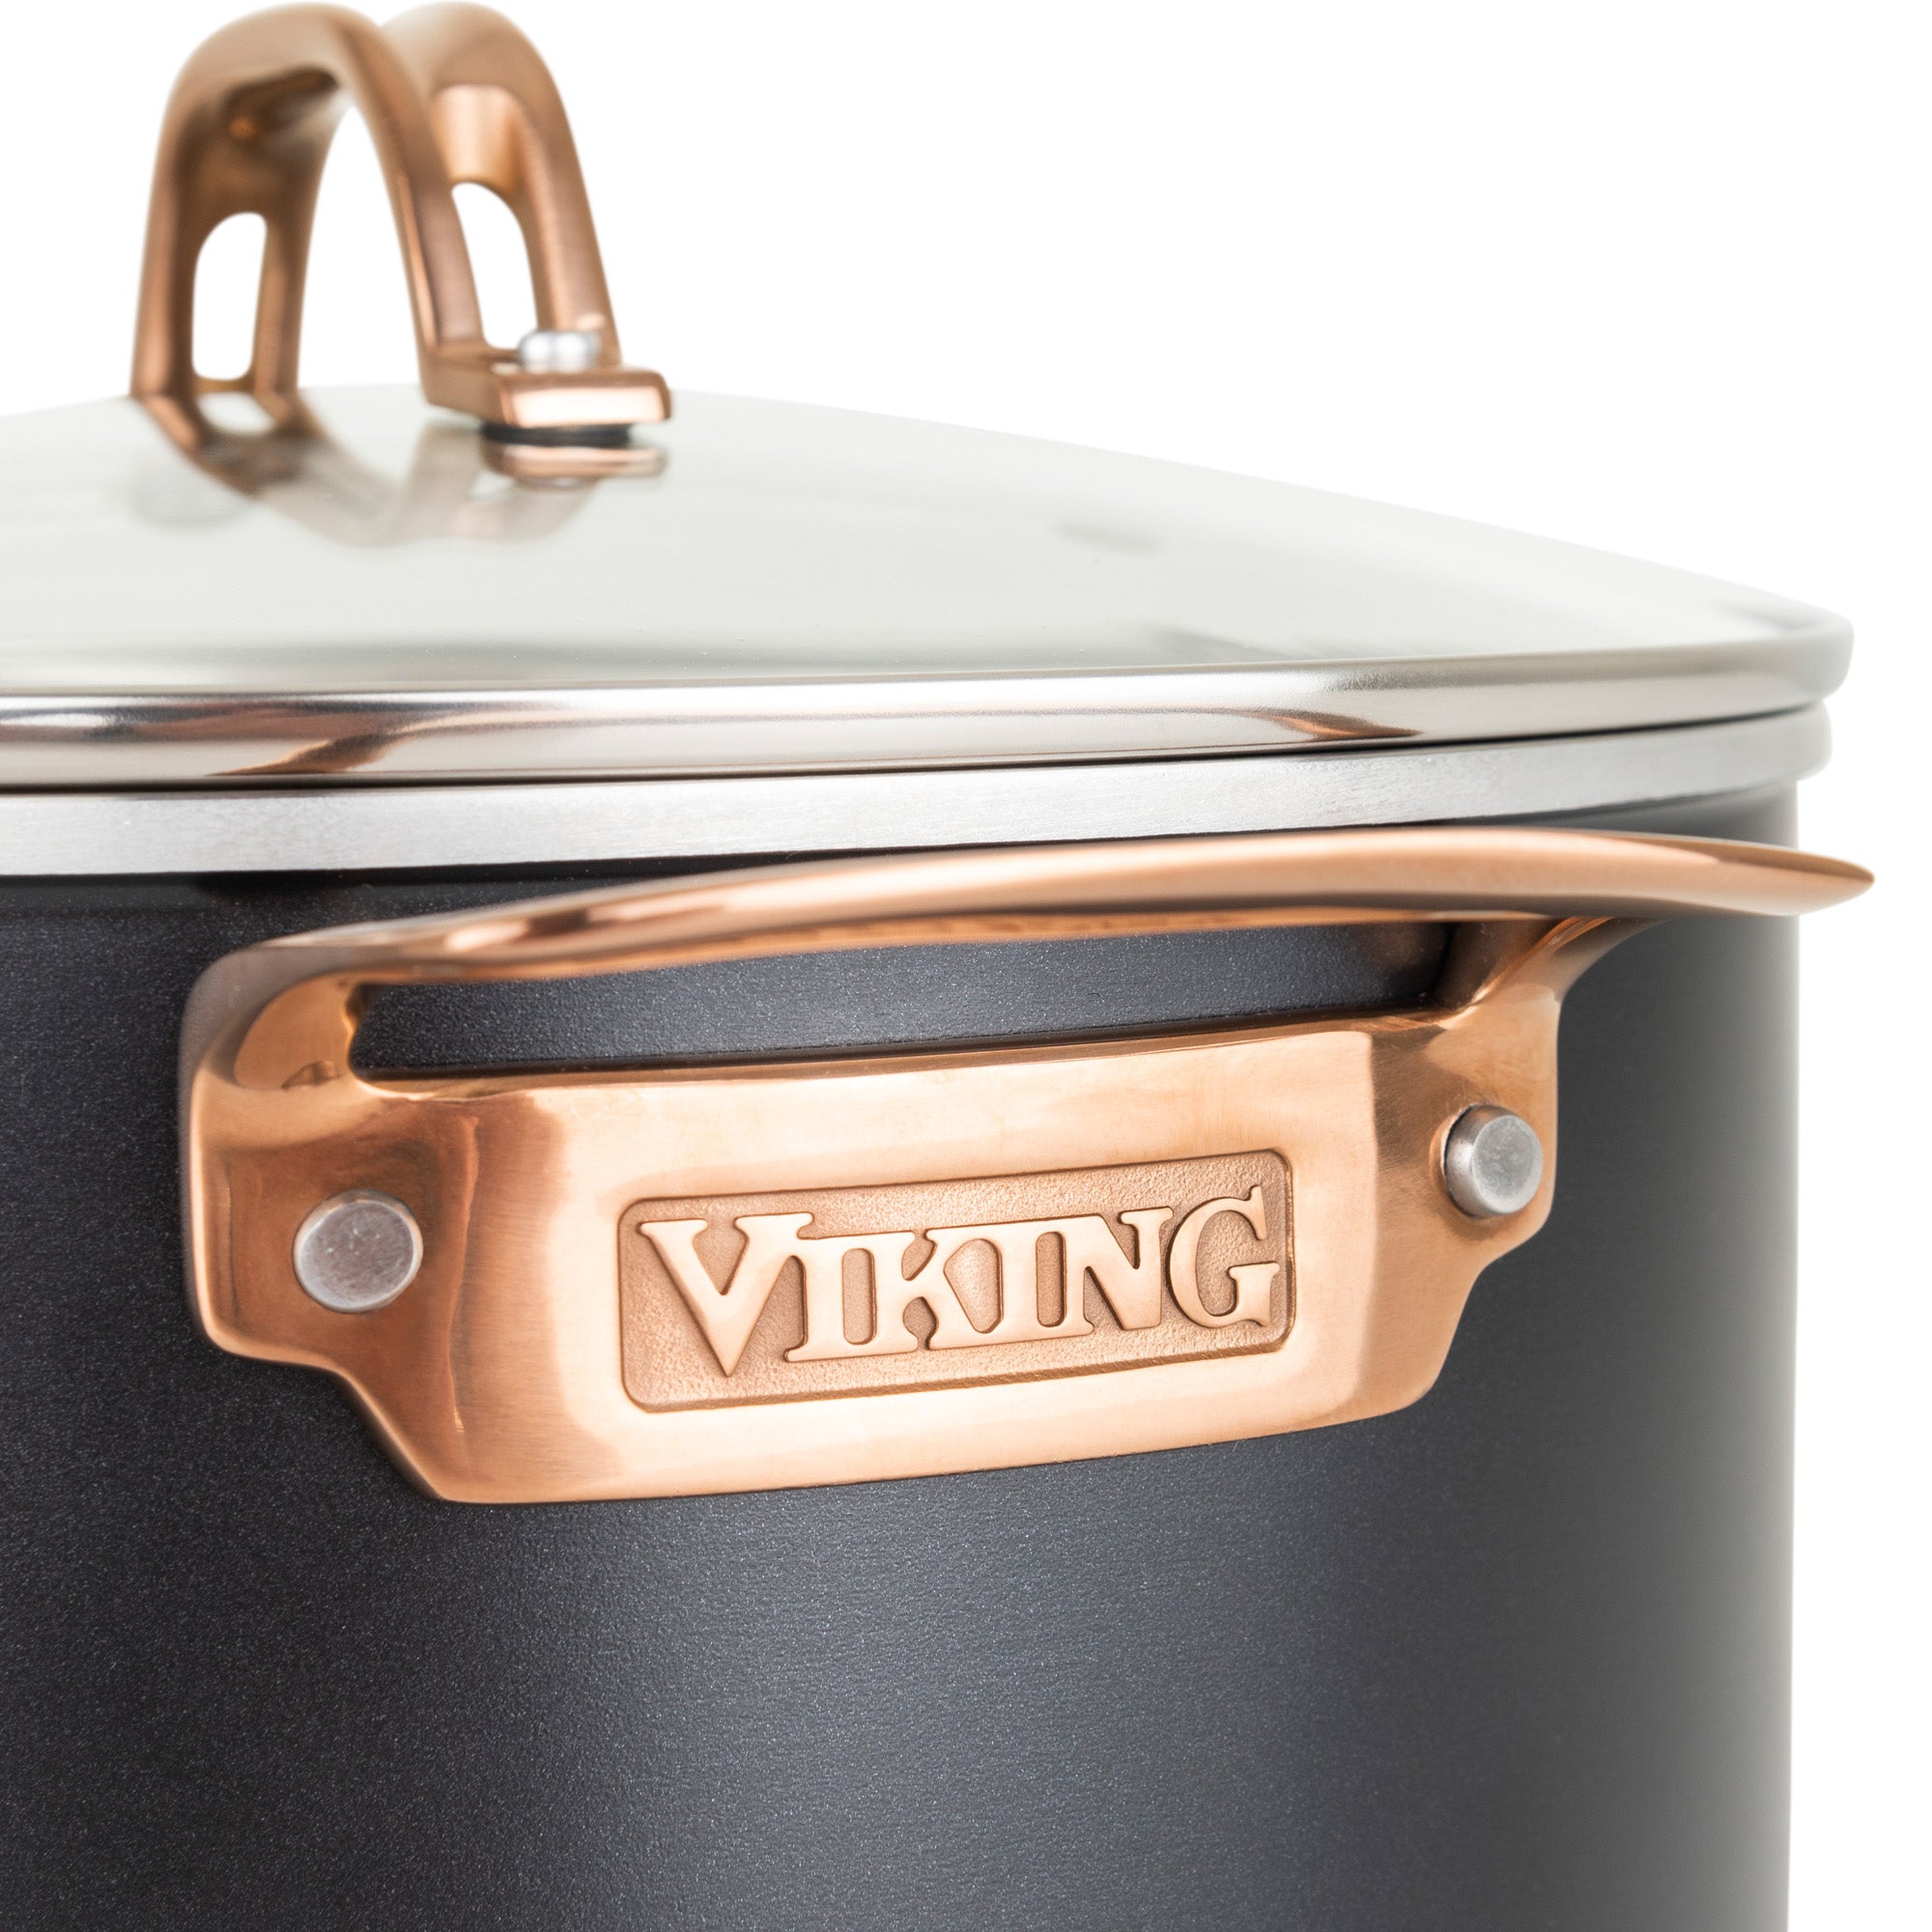 Viking 3-Ply 11 Piece Black and Copper Cookware Set with Glass Lids